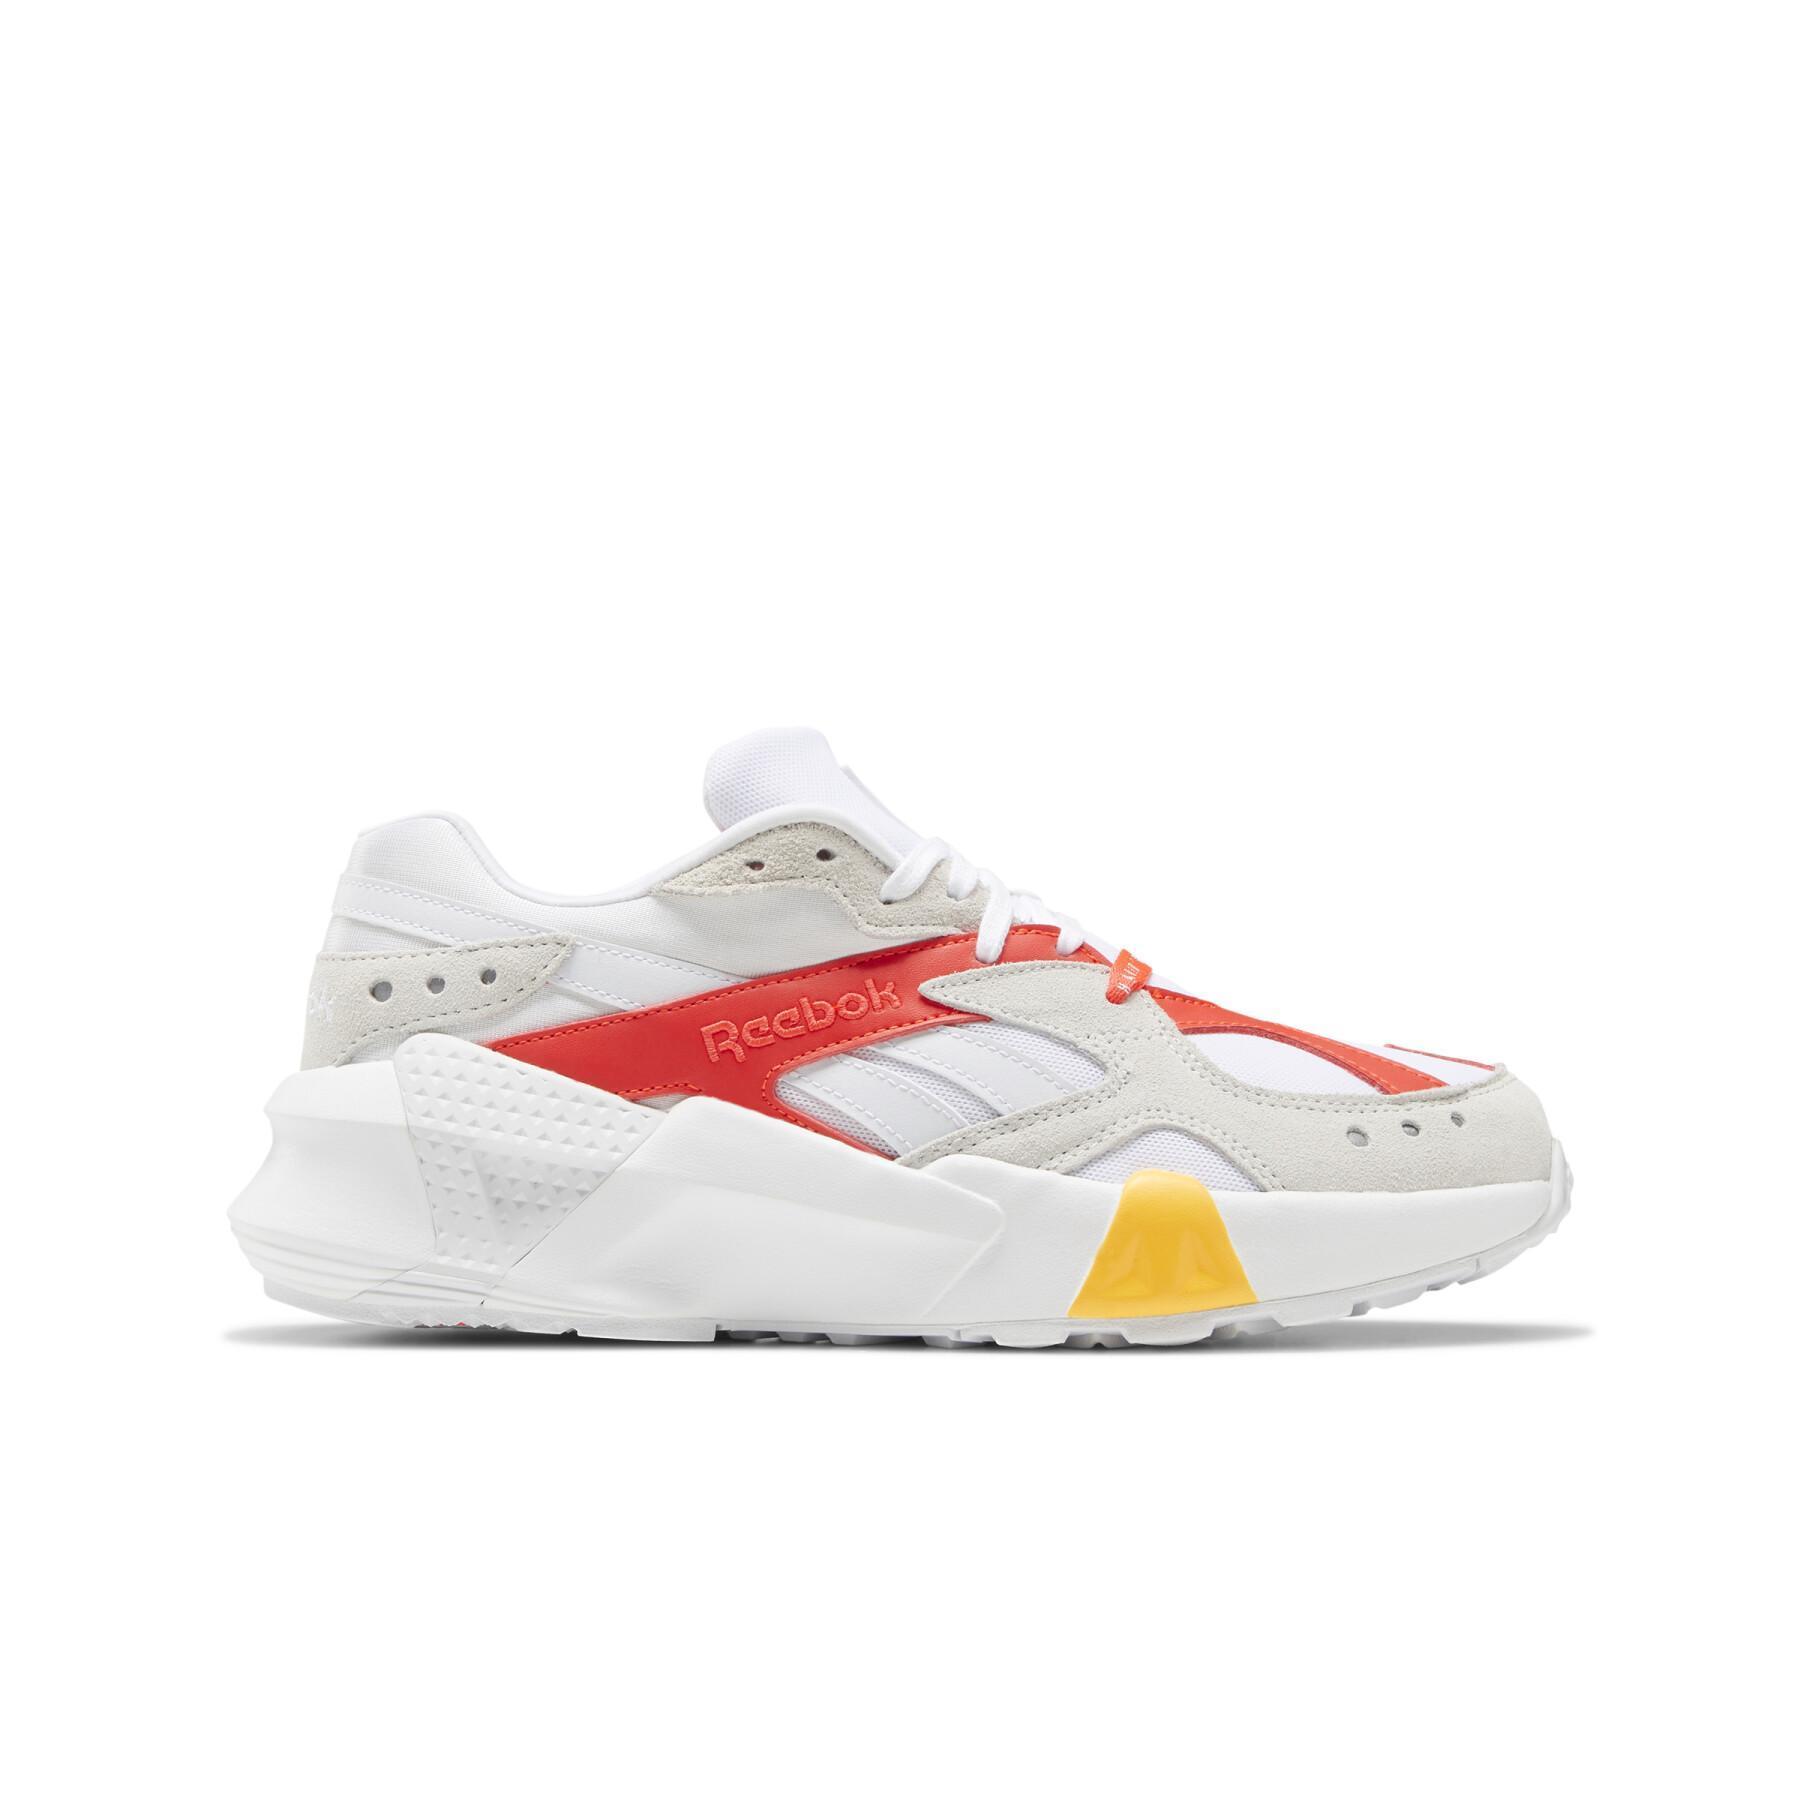 reebok classics dv5386 1 footwear photography side lateral center view white 000